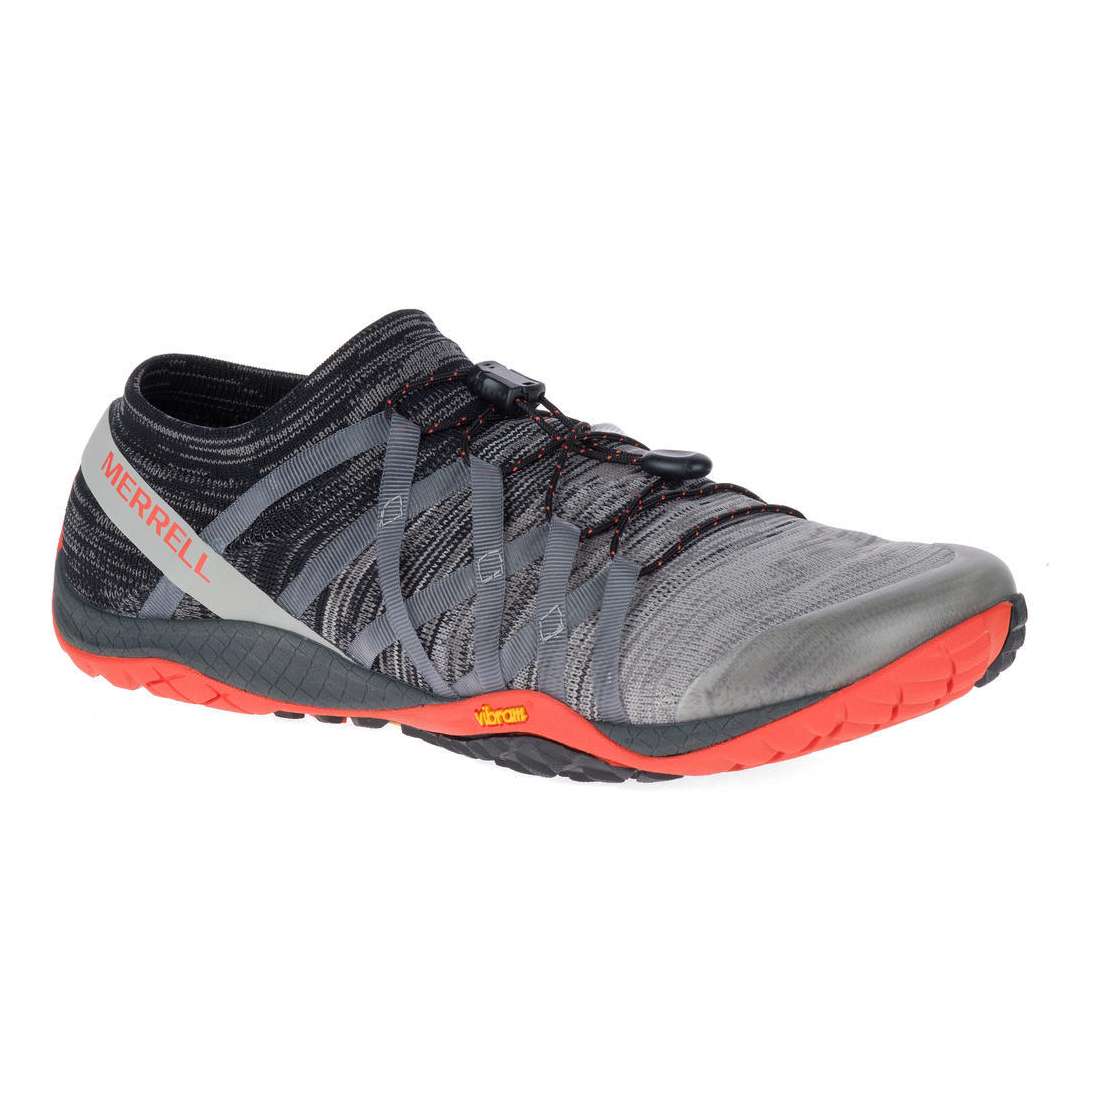 Merrell Trail Glove 4 Knit| shoes 